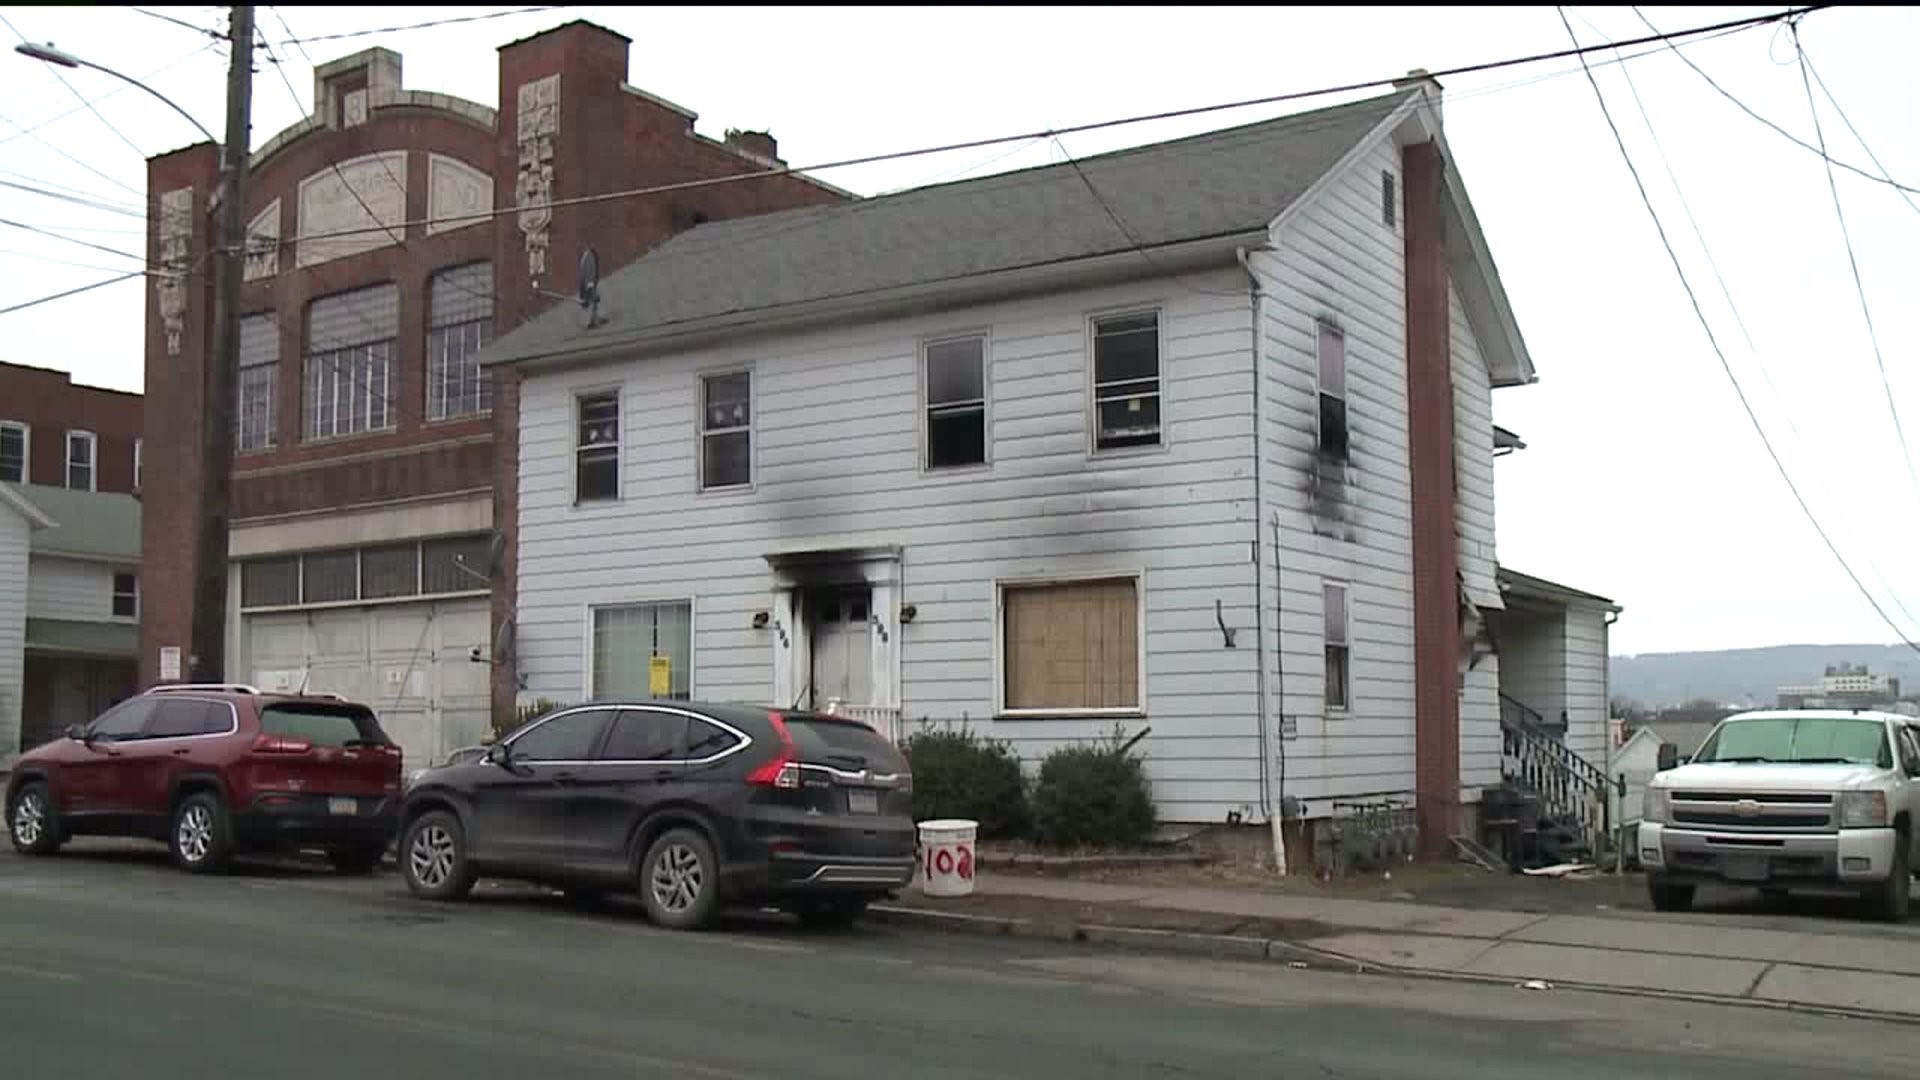 Wilkes-Barre Family Still Without a Home After Fire